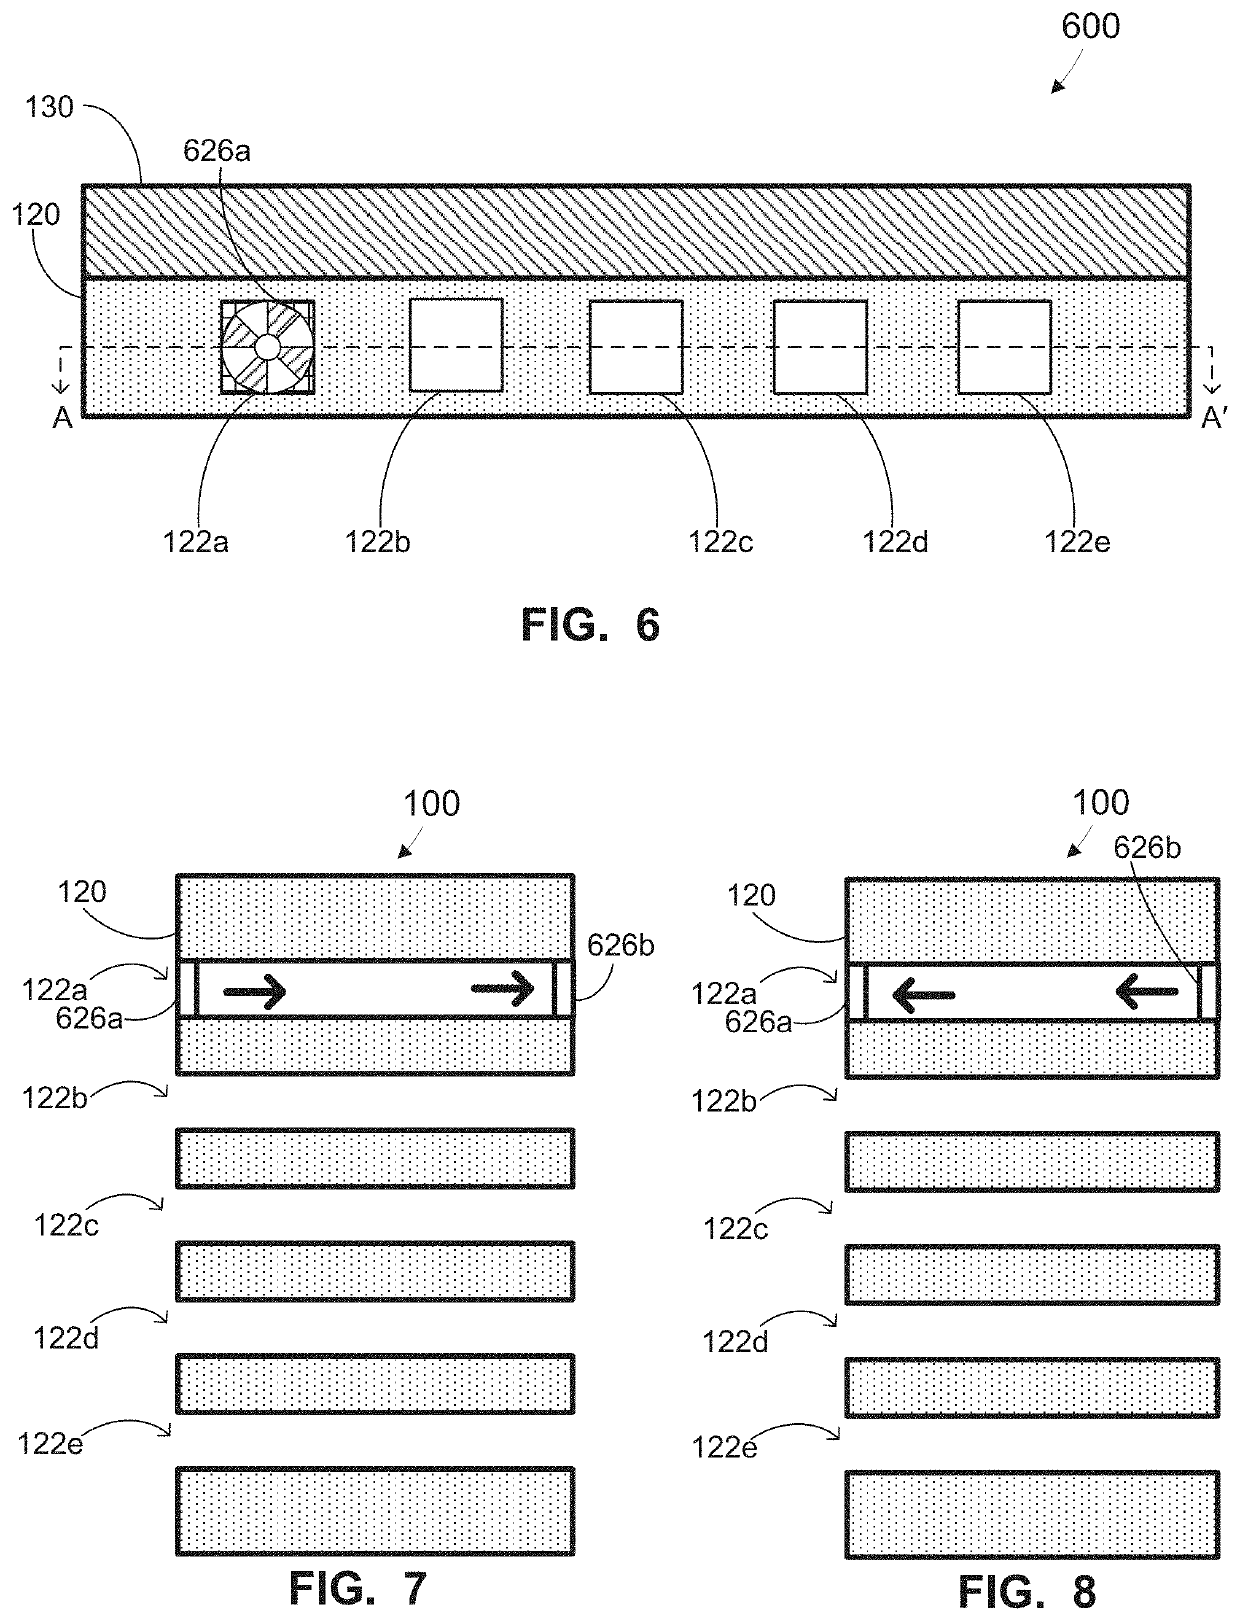 Mattress system comprising one or more electronic devices configured for smart home control